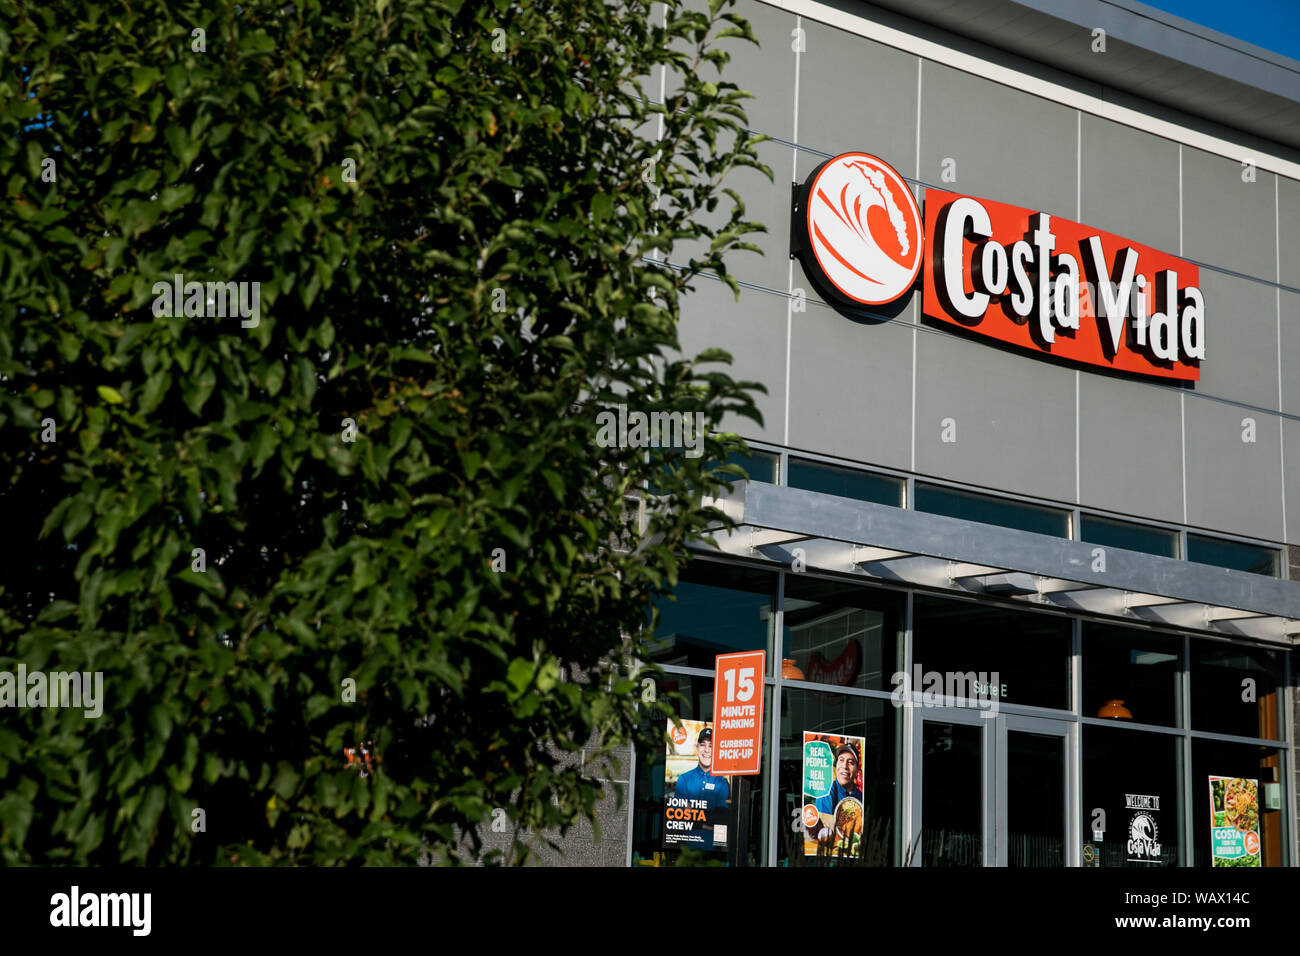 A logo sign outside of a Costa Vida restaurant location in Lehi, Utah on July 28, 2019. Stock Photo